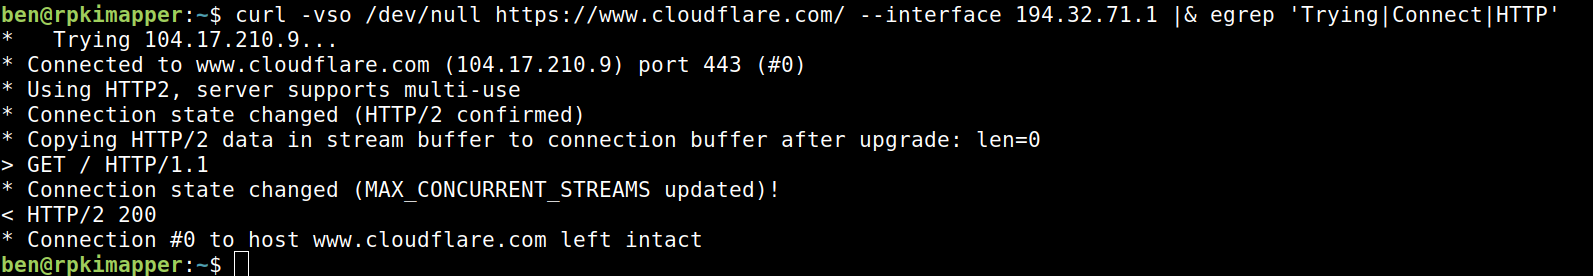 Cloudflare can still reach 194.32.71.0/24